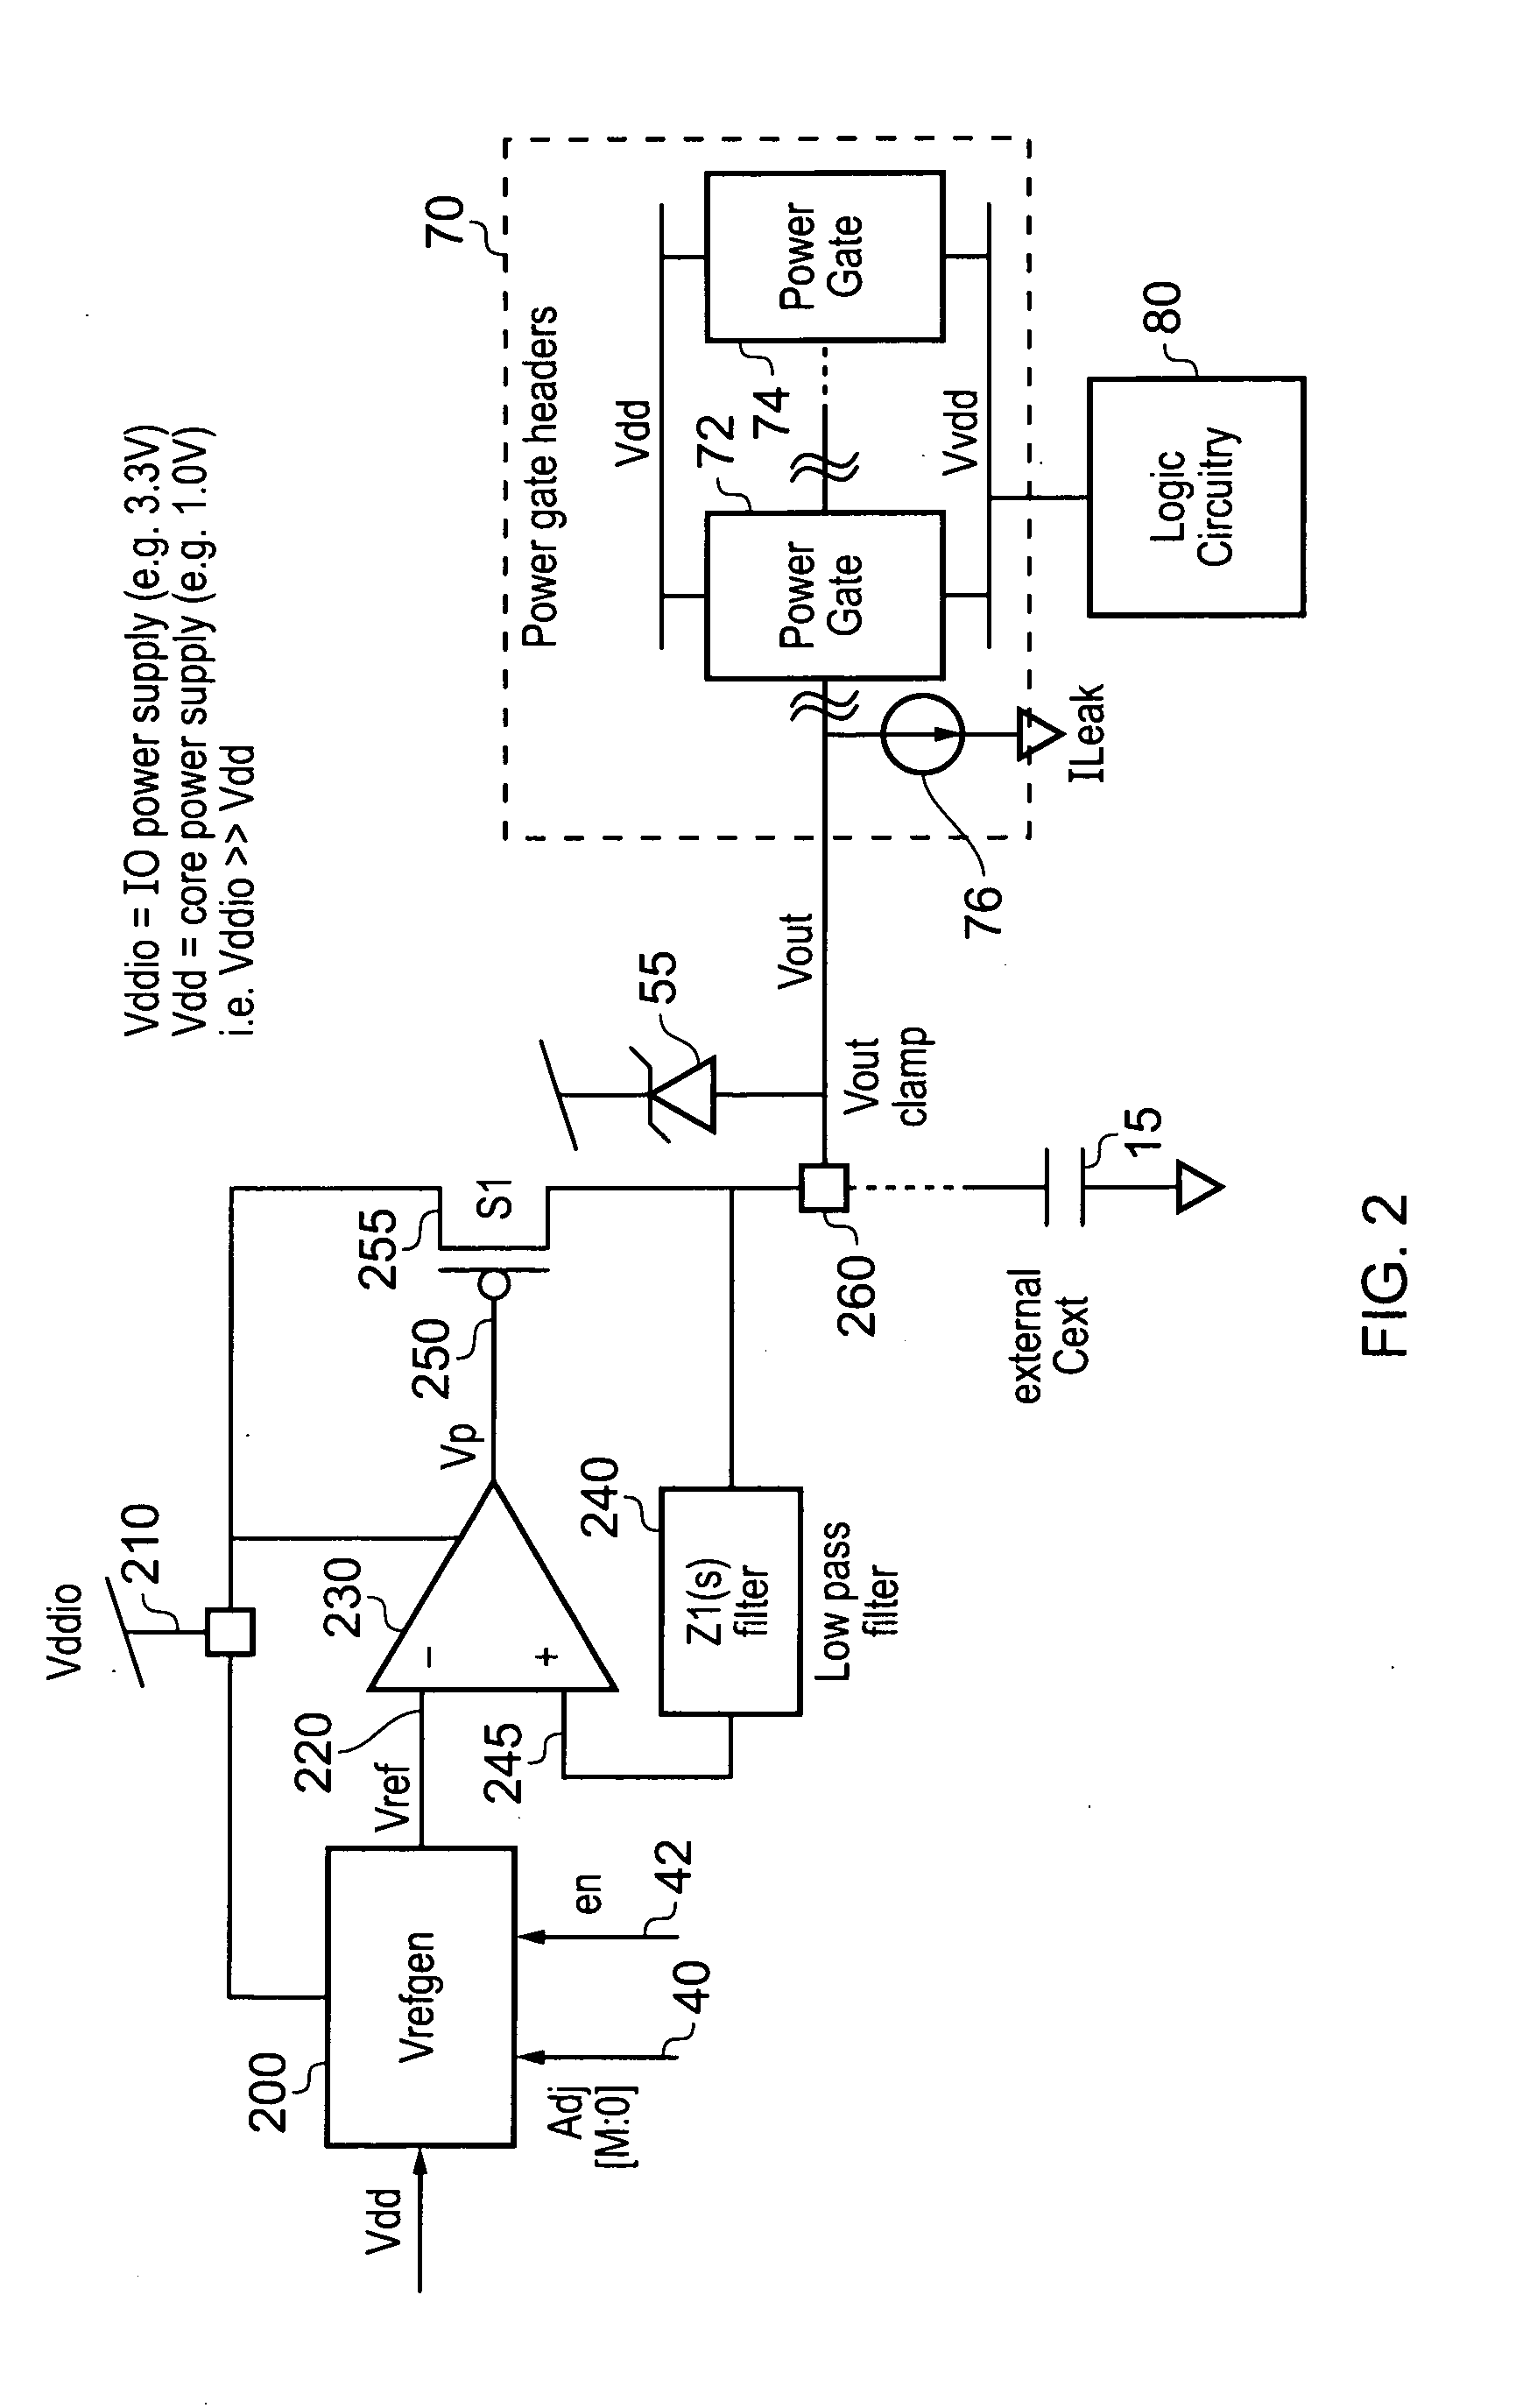 Apparatus and method for controlling power gating in an integrated circuit